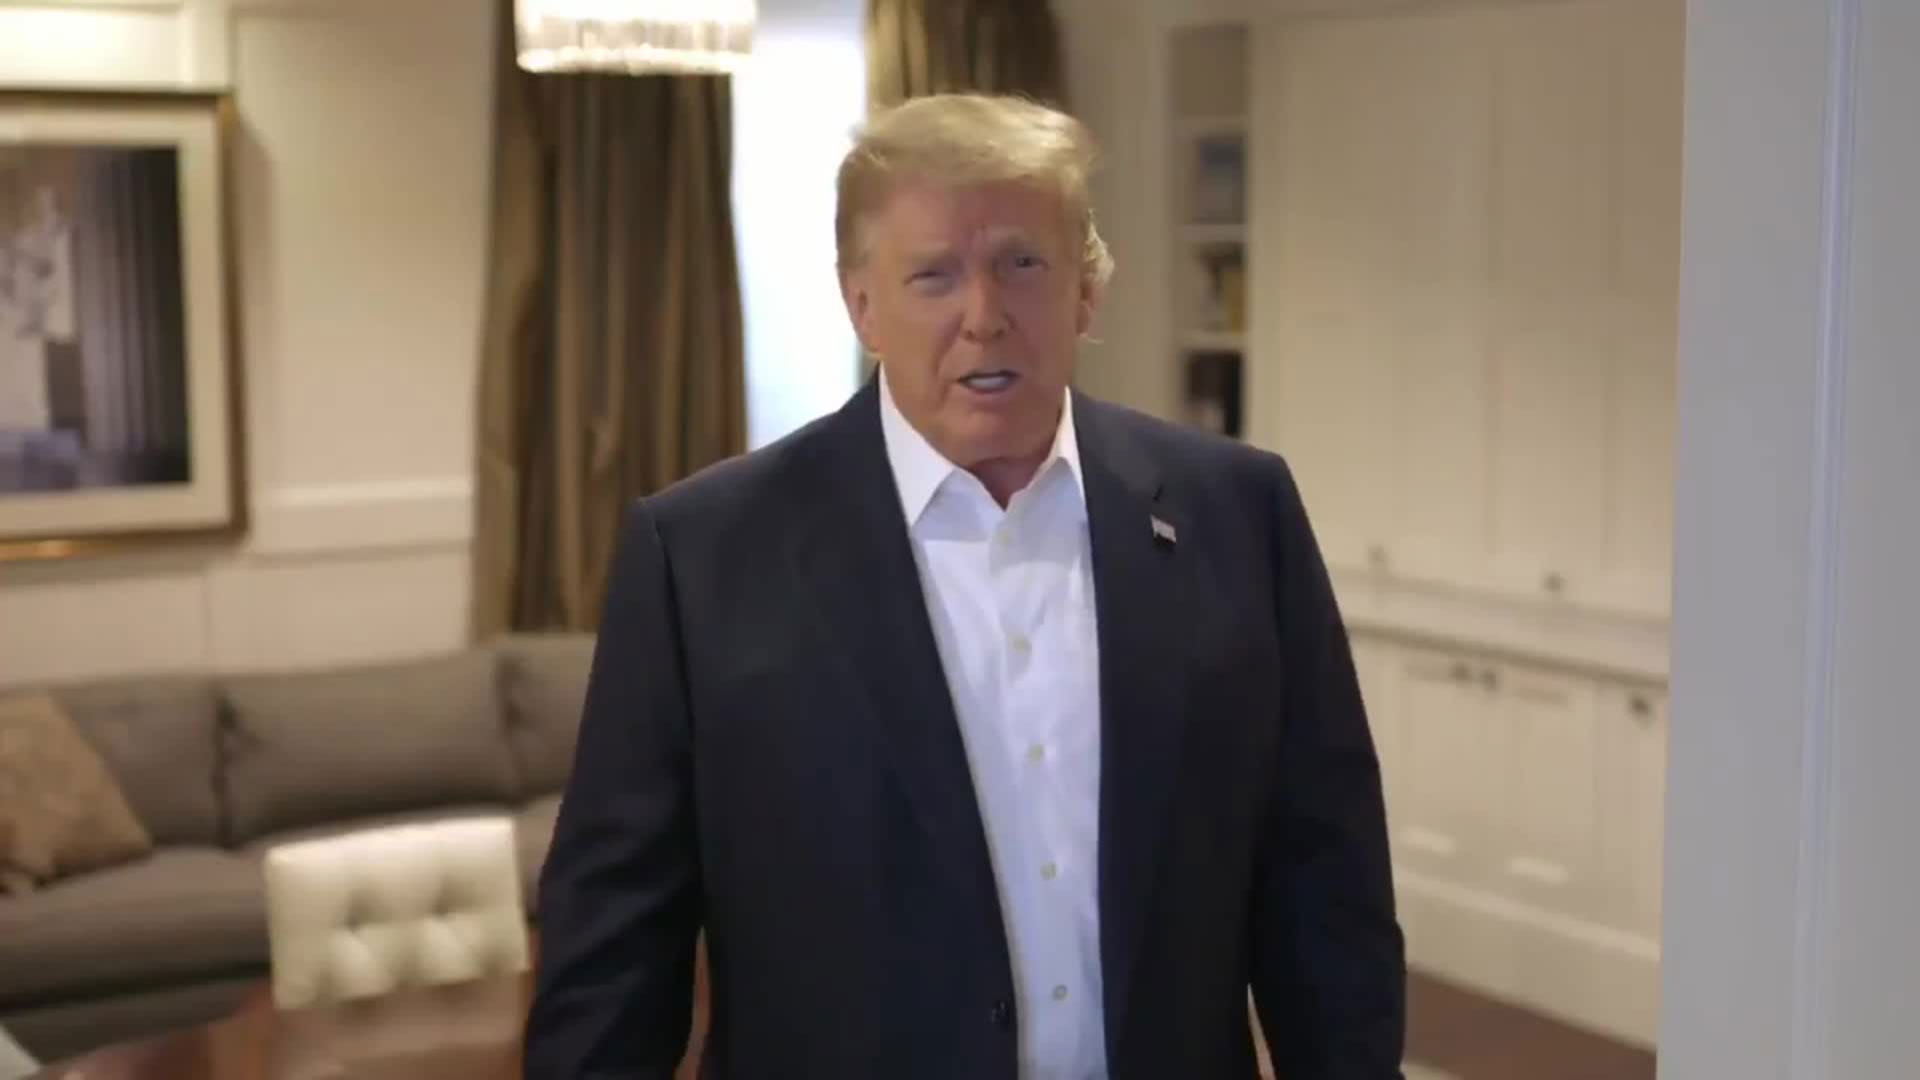 President Donald Trump shares a video from Walter Reed Medical Center on Sunday, October 4.